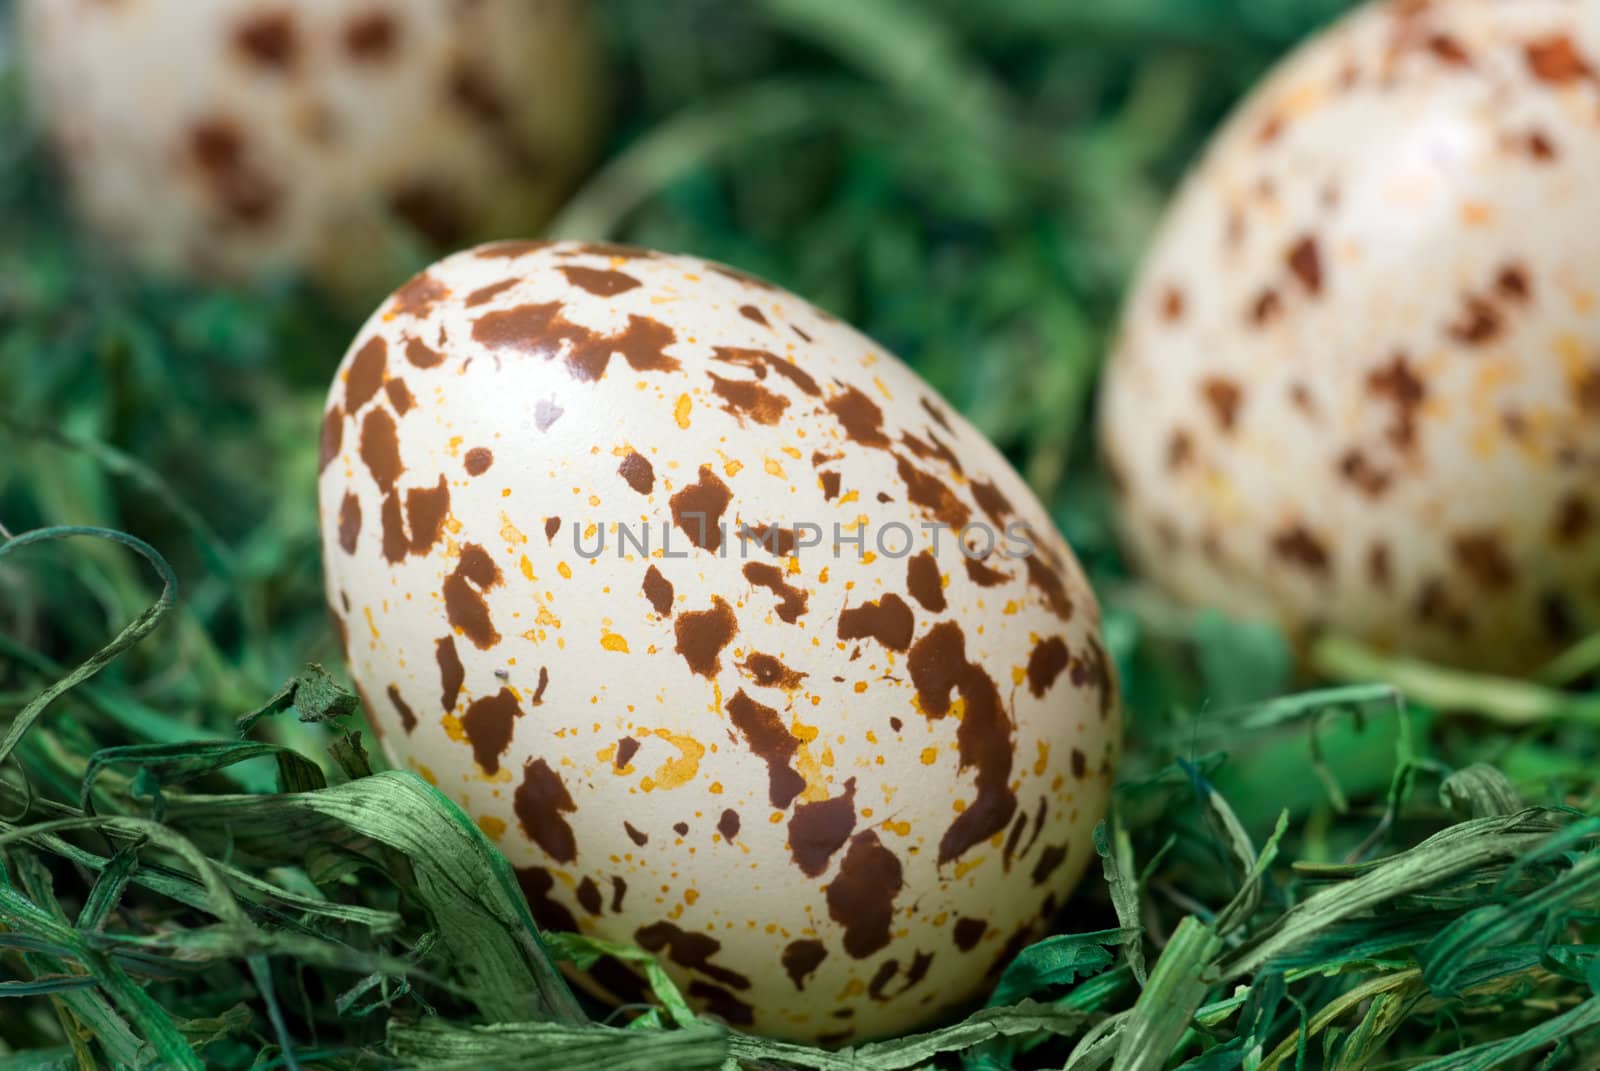 Spotted egg on the green hay. Selective focus, shallow depth of field.